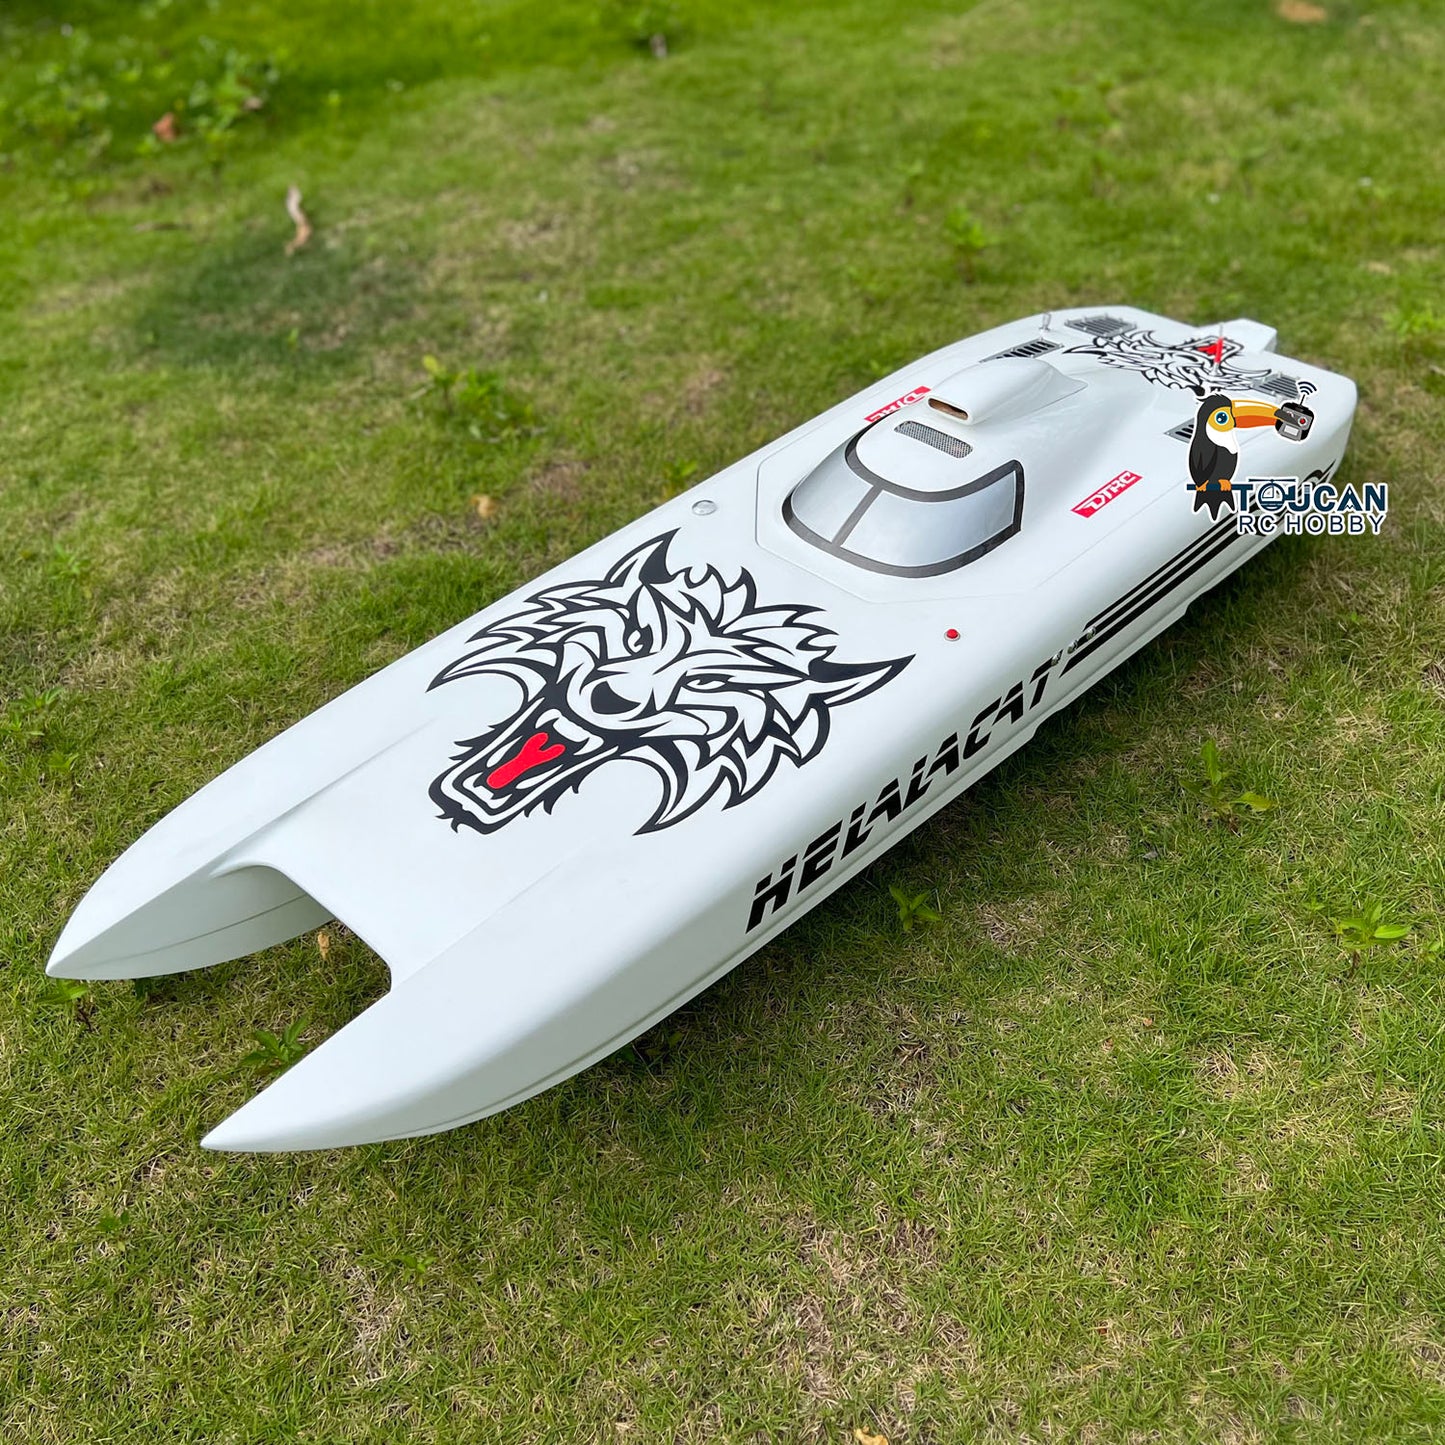 G30E 30CC Prepainted Gasoline Racing KIT RC Boat Hull DIY Model Kevlar for Advanced Player 1300*360*220mm Adult Present W/O Mount